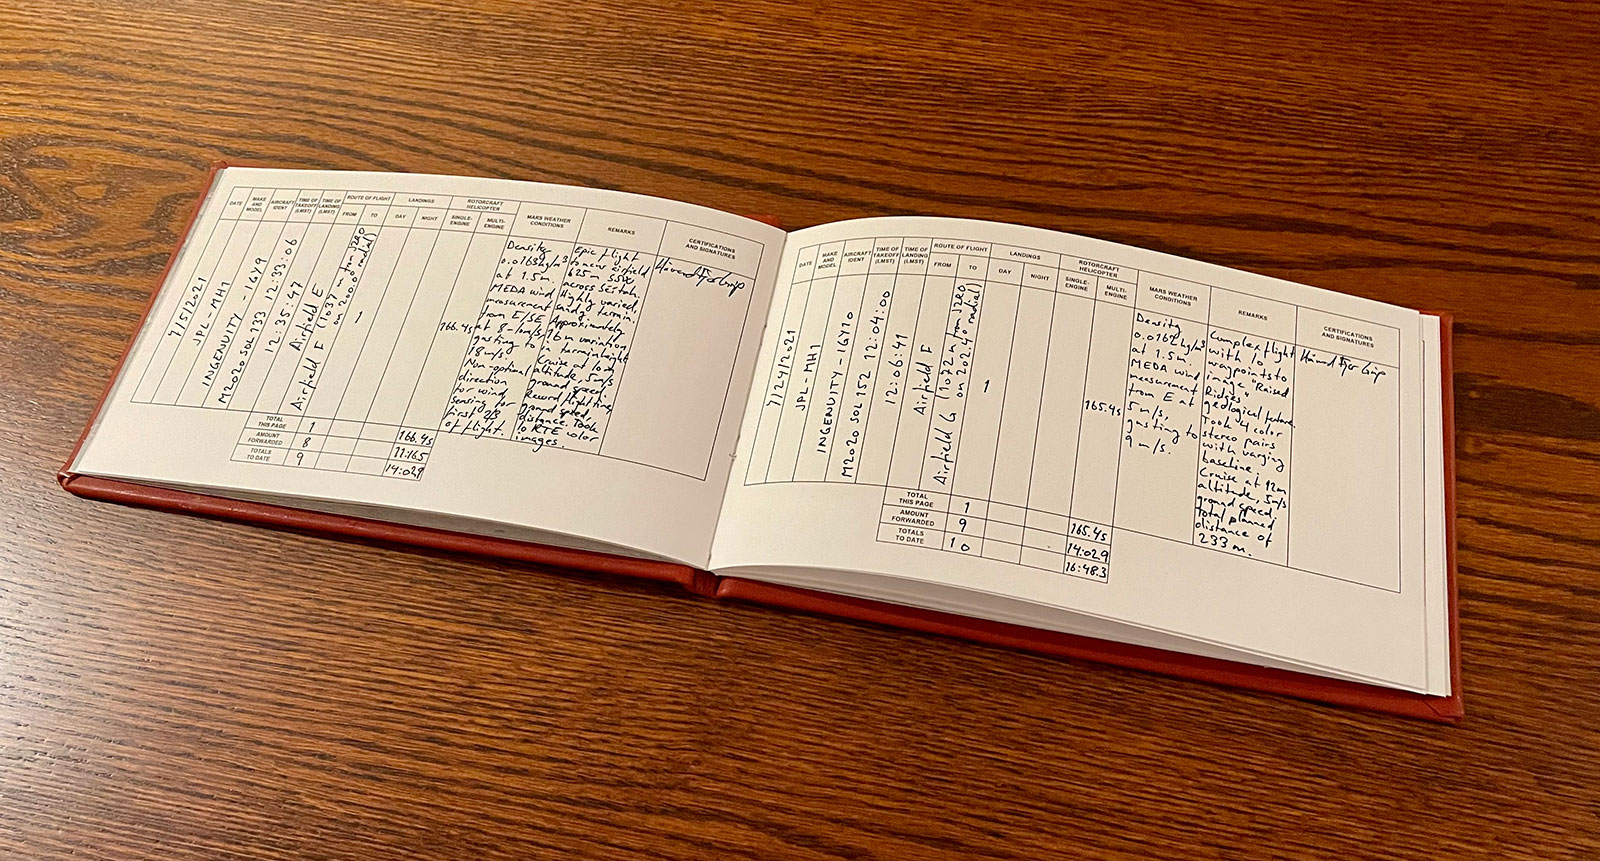 Håvard Grip, chief pilot of NASA's Ingenuity Mars Helicopter, documents the details of each flight in the mission’s logbook, The Nominal Pilot’s Logbook for Planets and Moons, after each flight. Entries for Flights 9 and 10 are seen here.